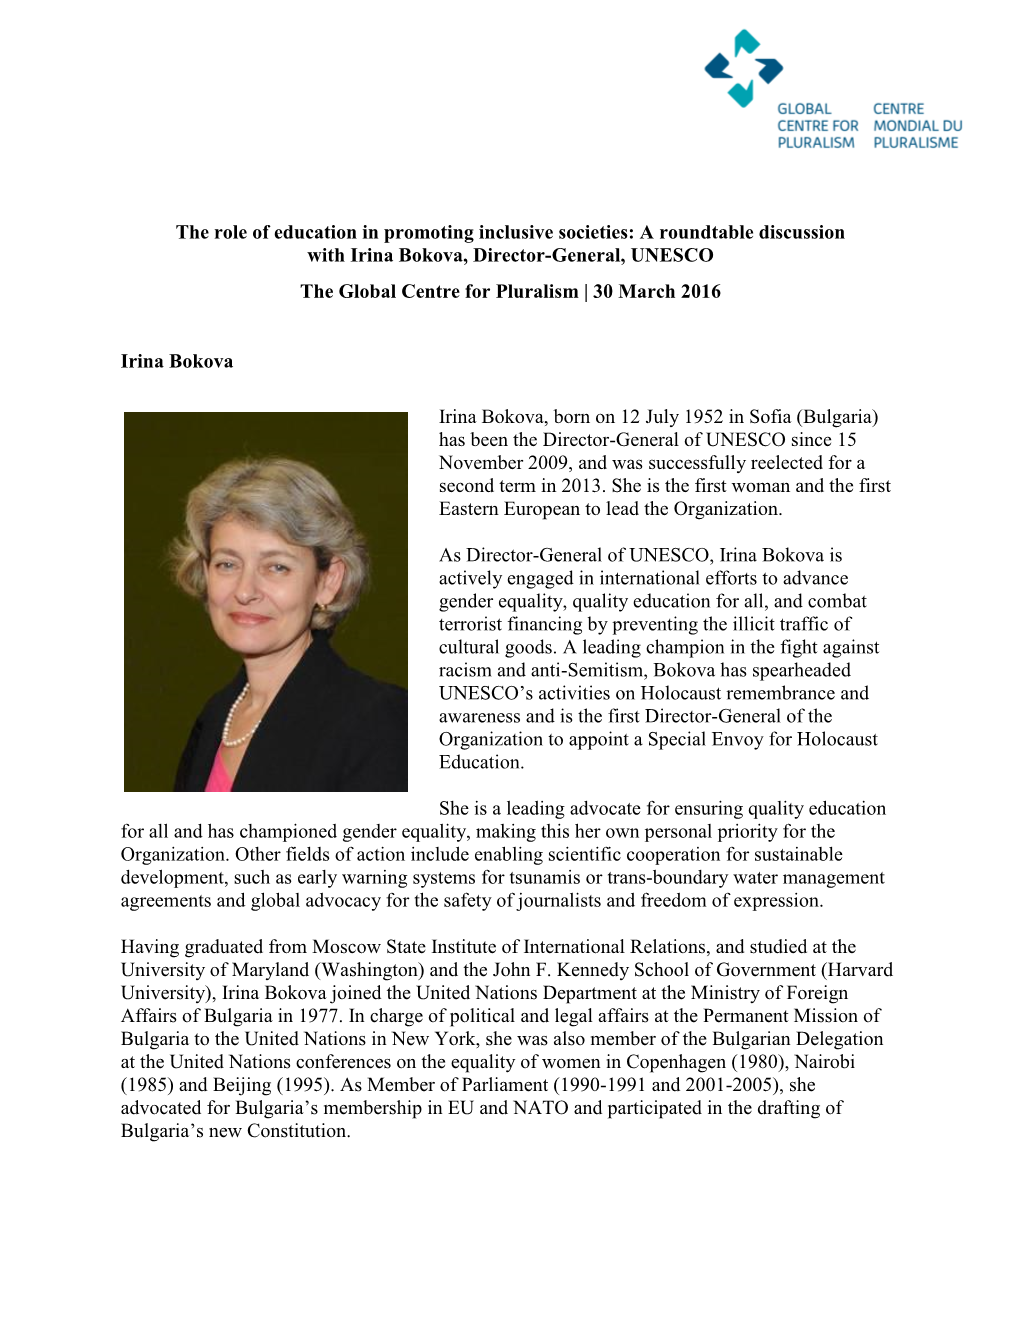 A Roundtable Discussion with Irina Bokova, Director-General, UNESCO the Global Centre for Pluralism | 30 March 2016